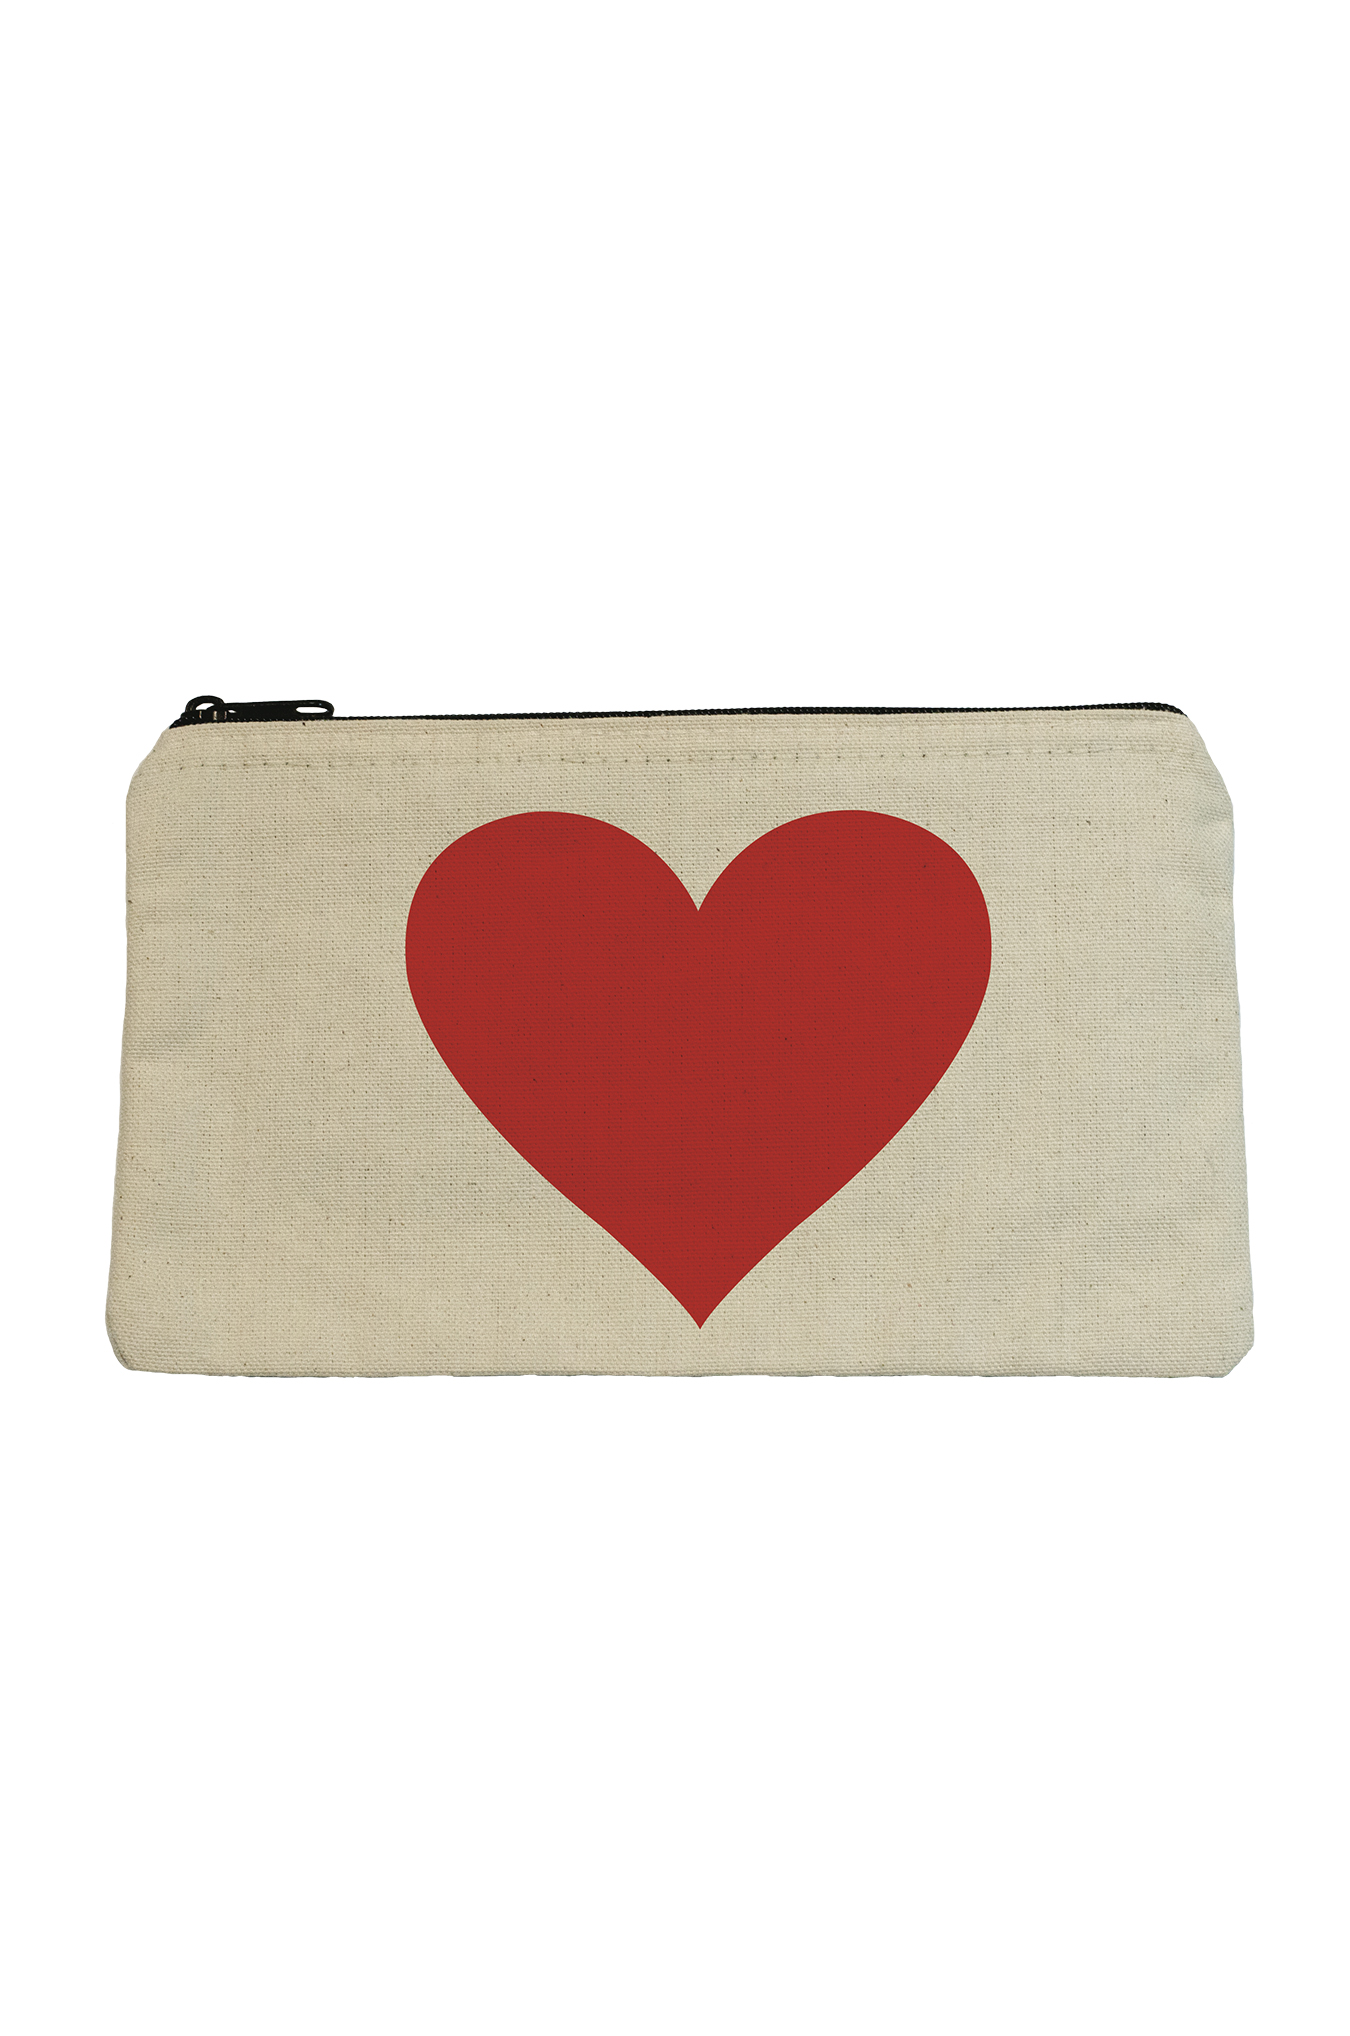 Big Heart Red Pouch